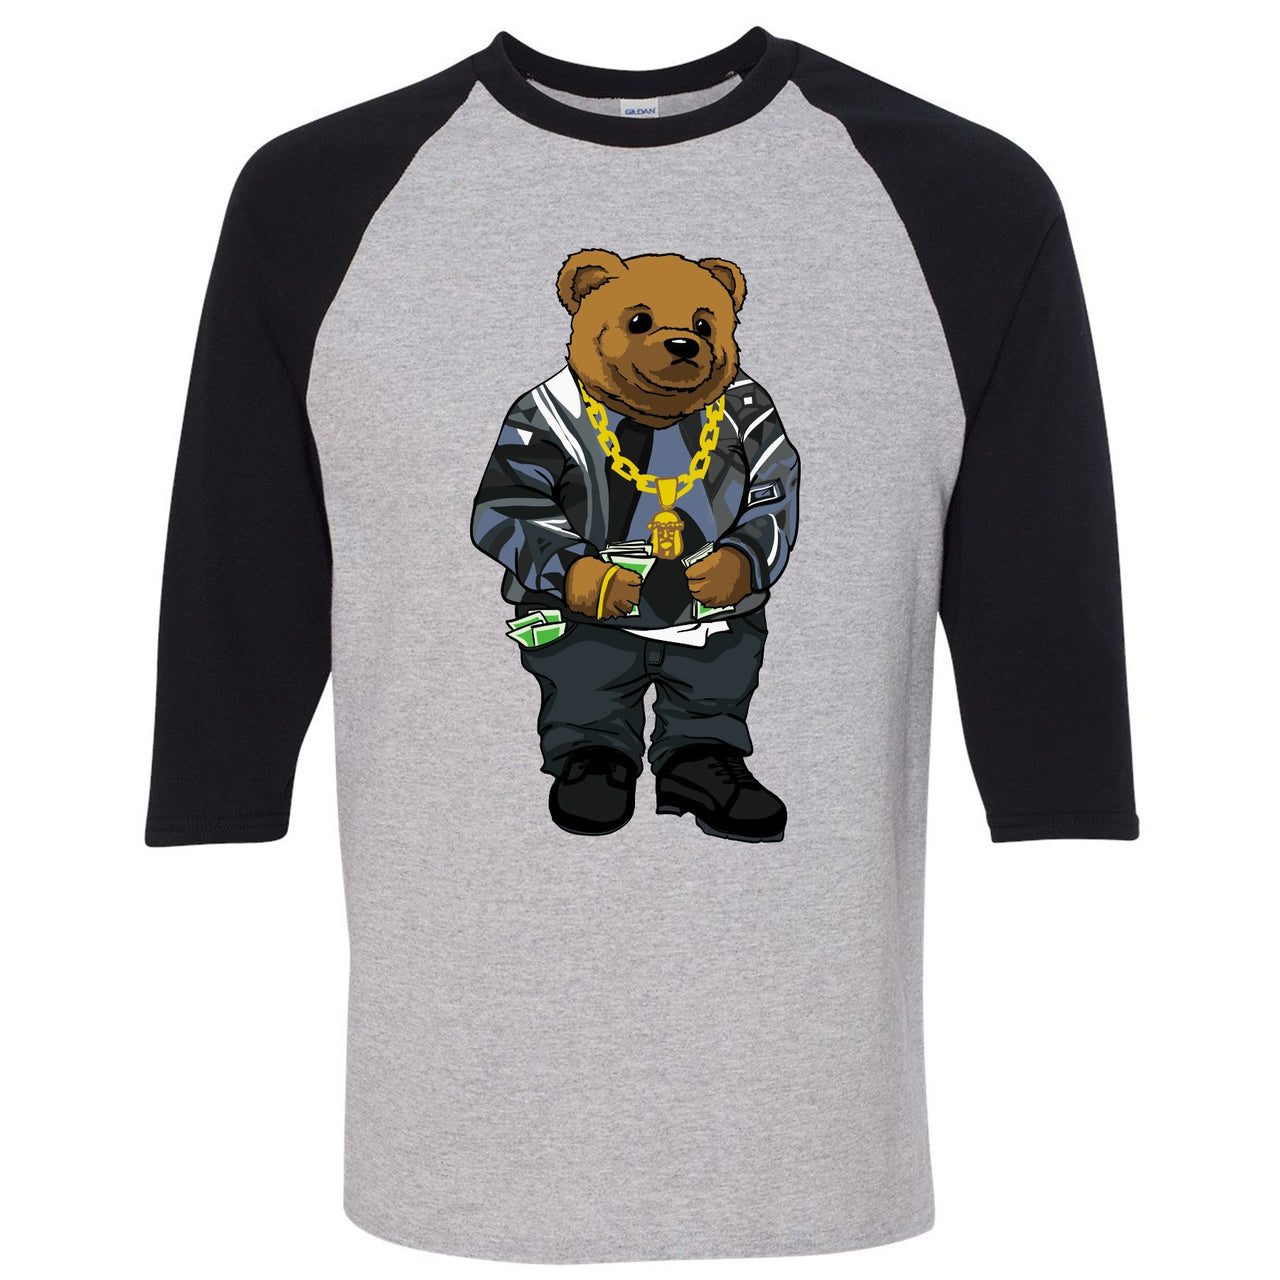 Cap and Gown 13s Raglan T Shirt | Sweater Bear, Black and Sports Grey